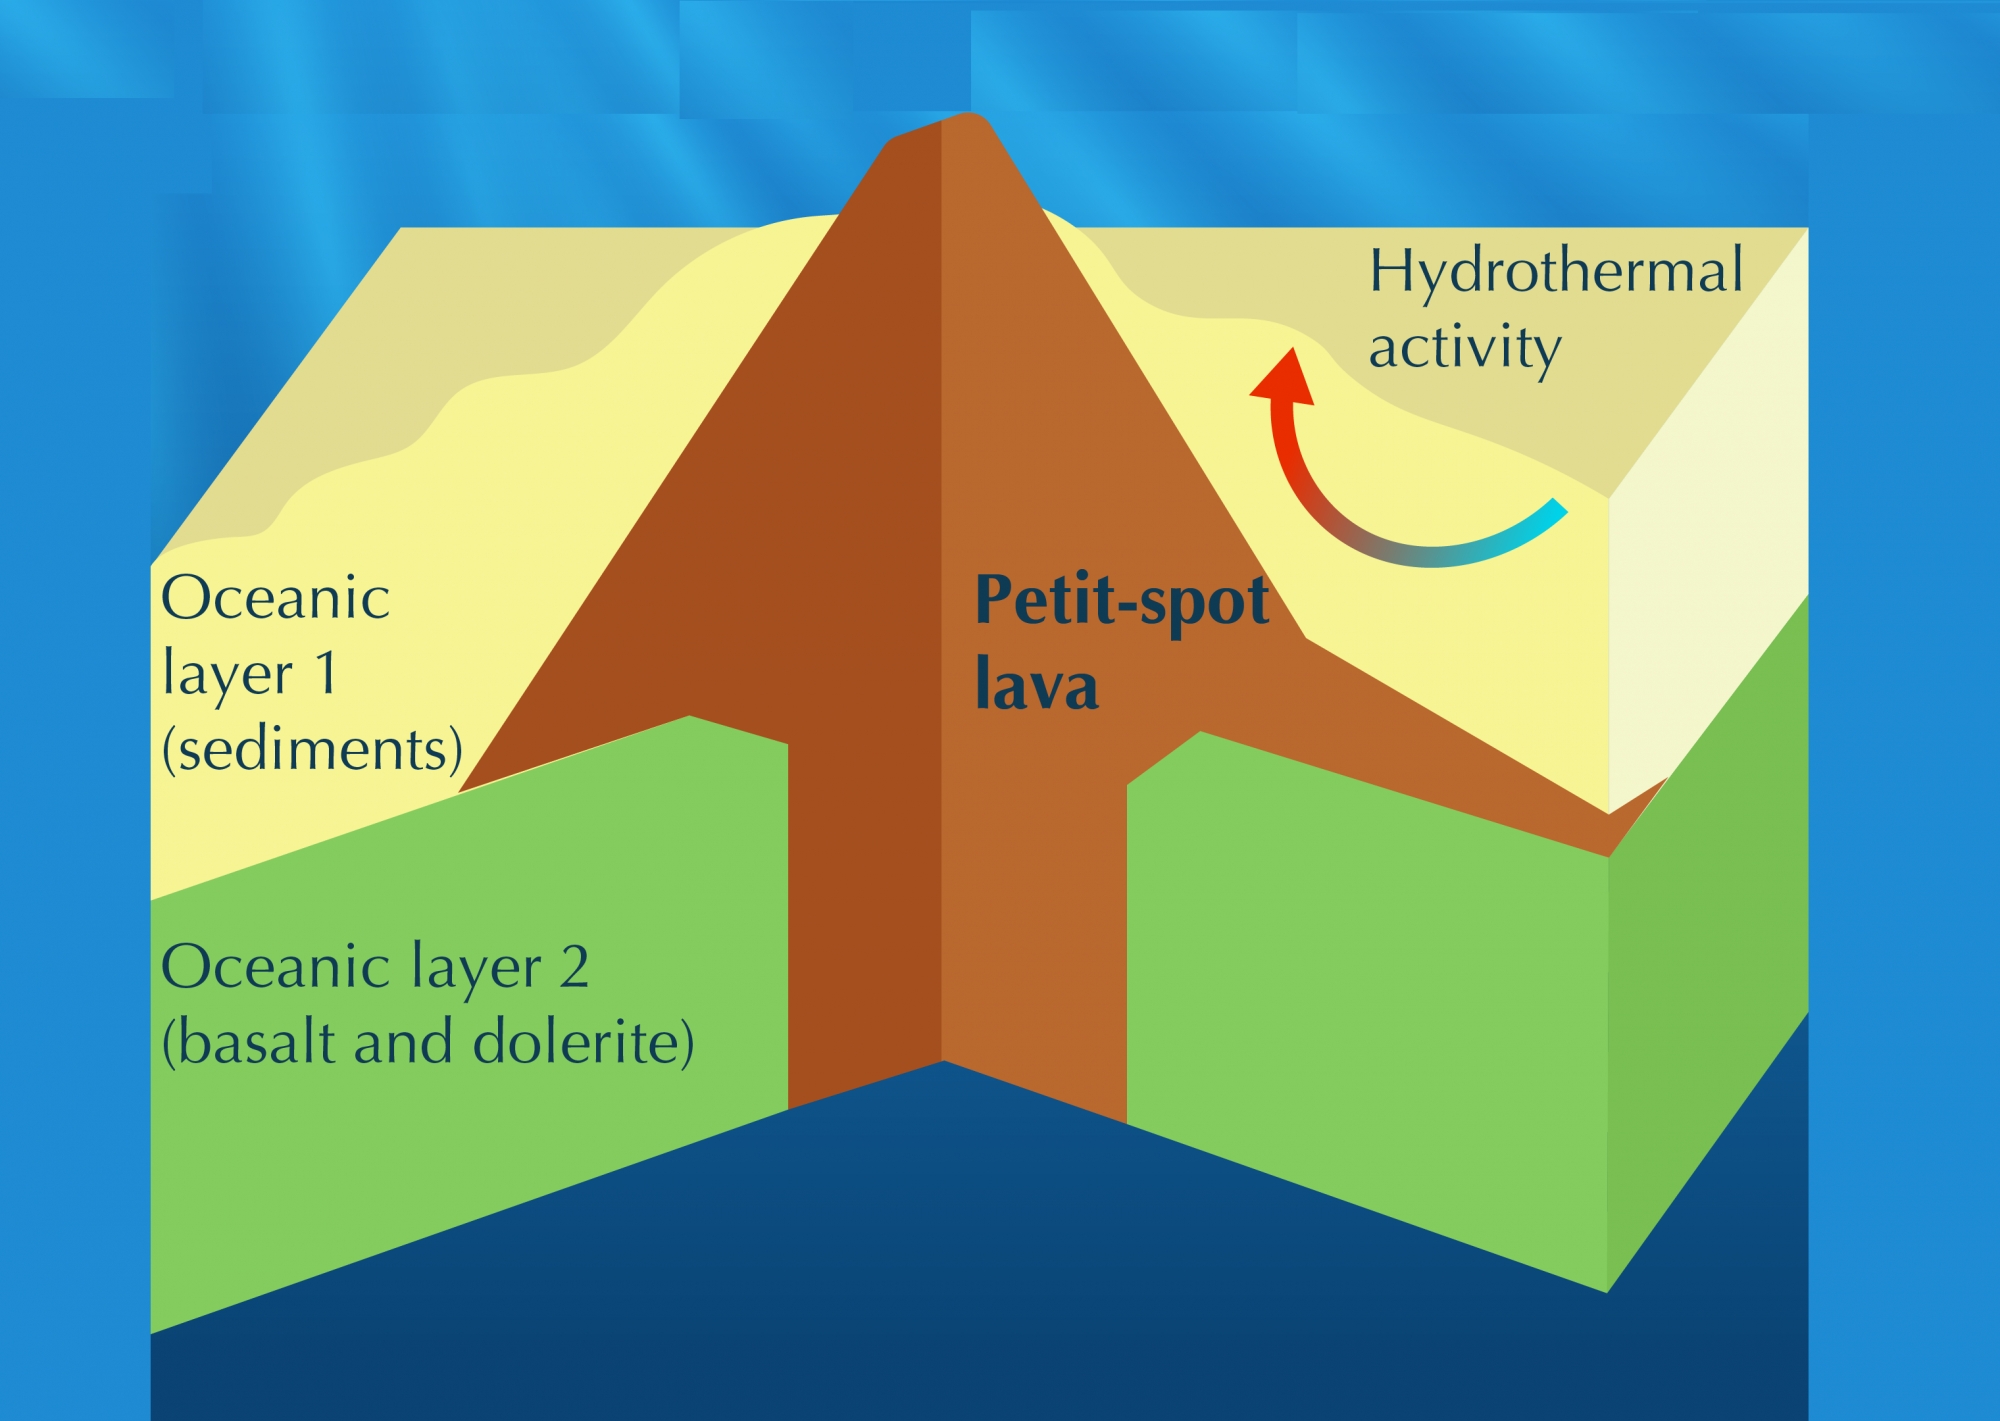 Petit-Spot Volcanoes Involve the Deepest Known Submarine Hydrothermal Activity, Possibly Release CO2 and Methane